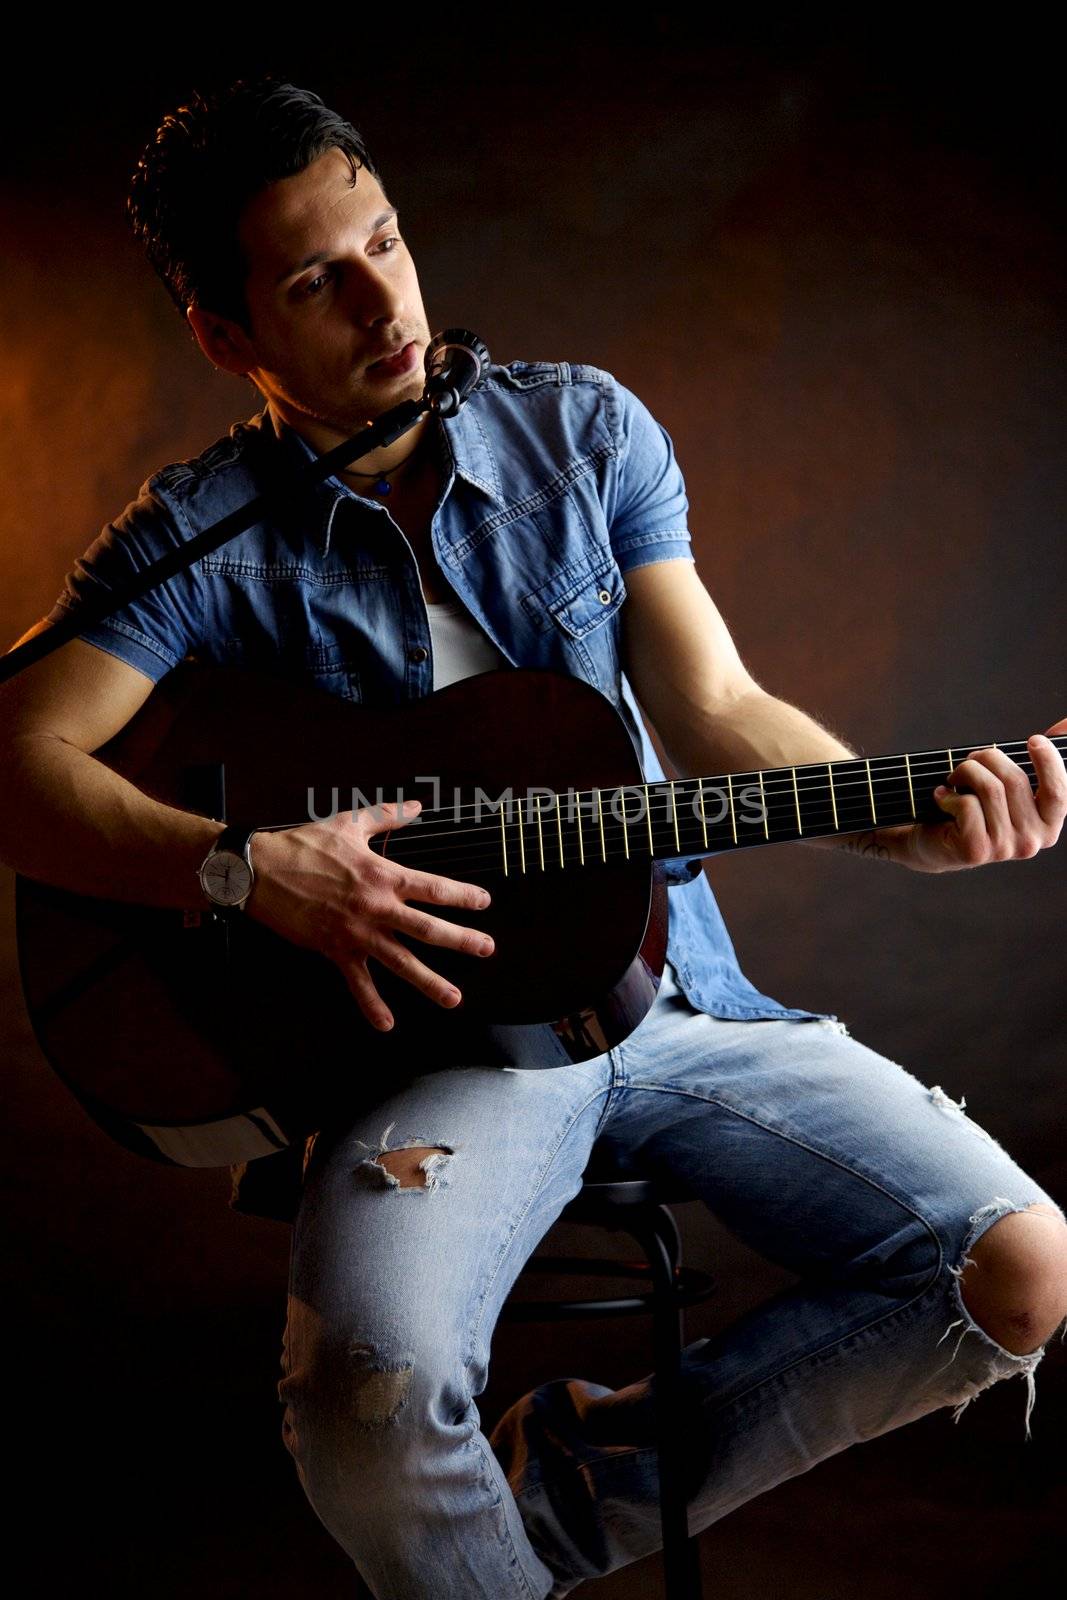 Serious male model with guitar intense by fmarsicano